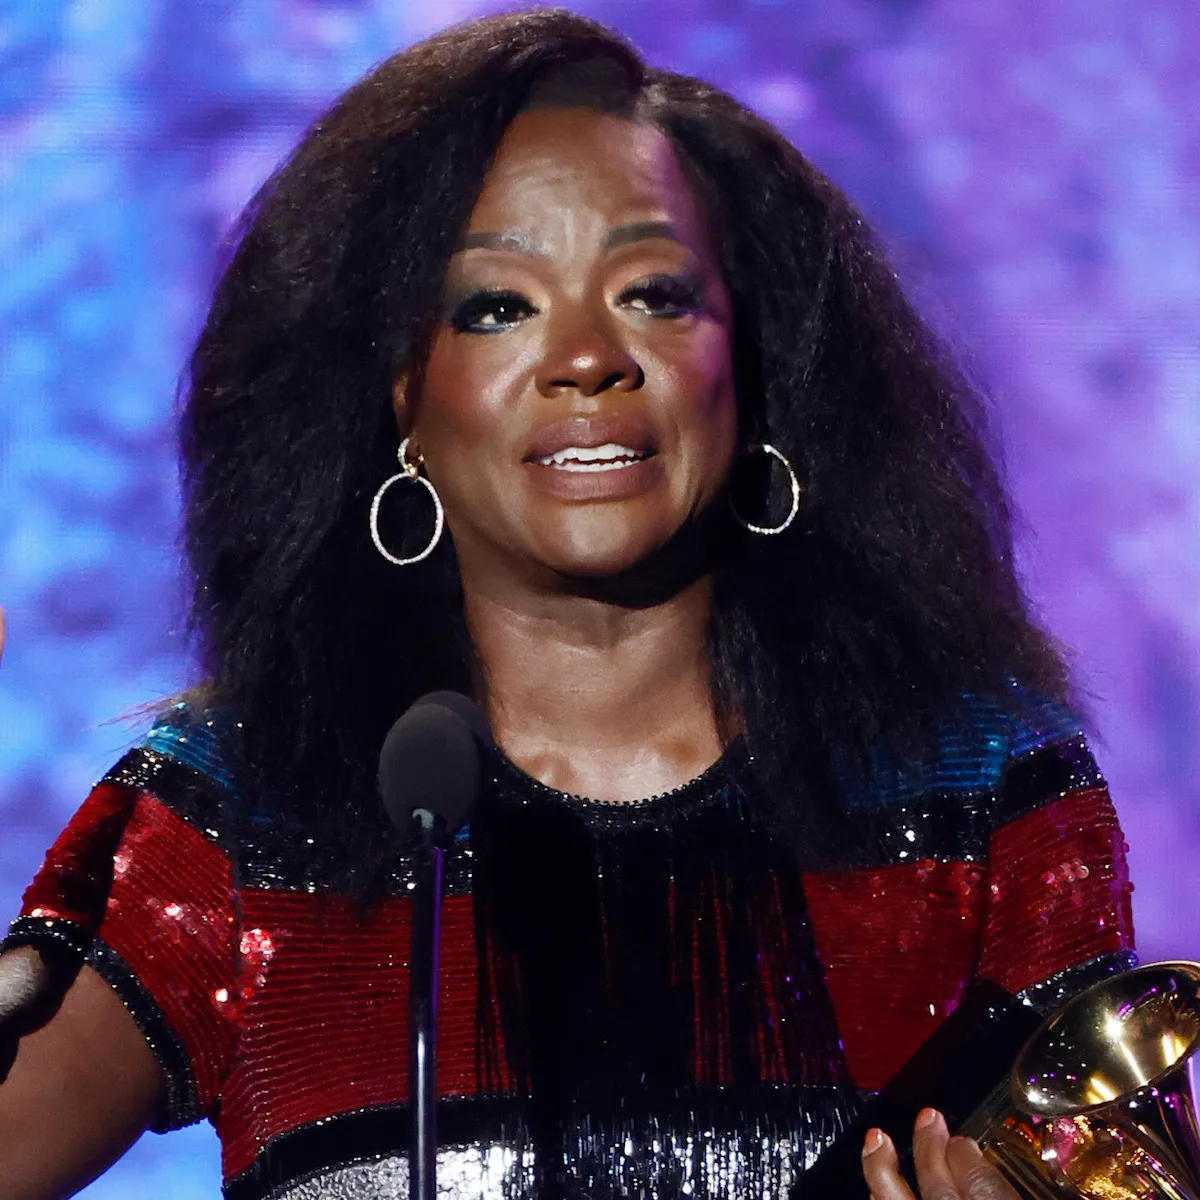 The Historic Win of a Black Woman at the Grammys